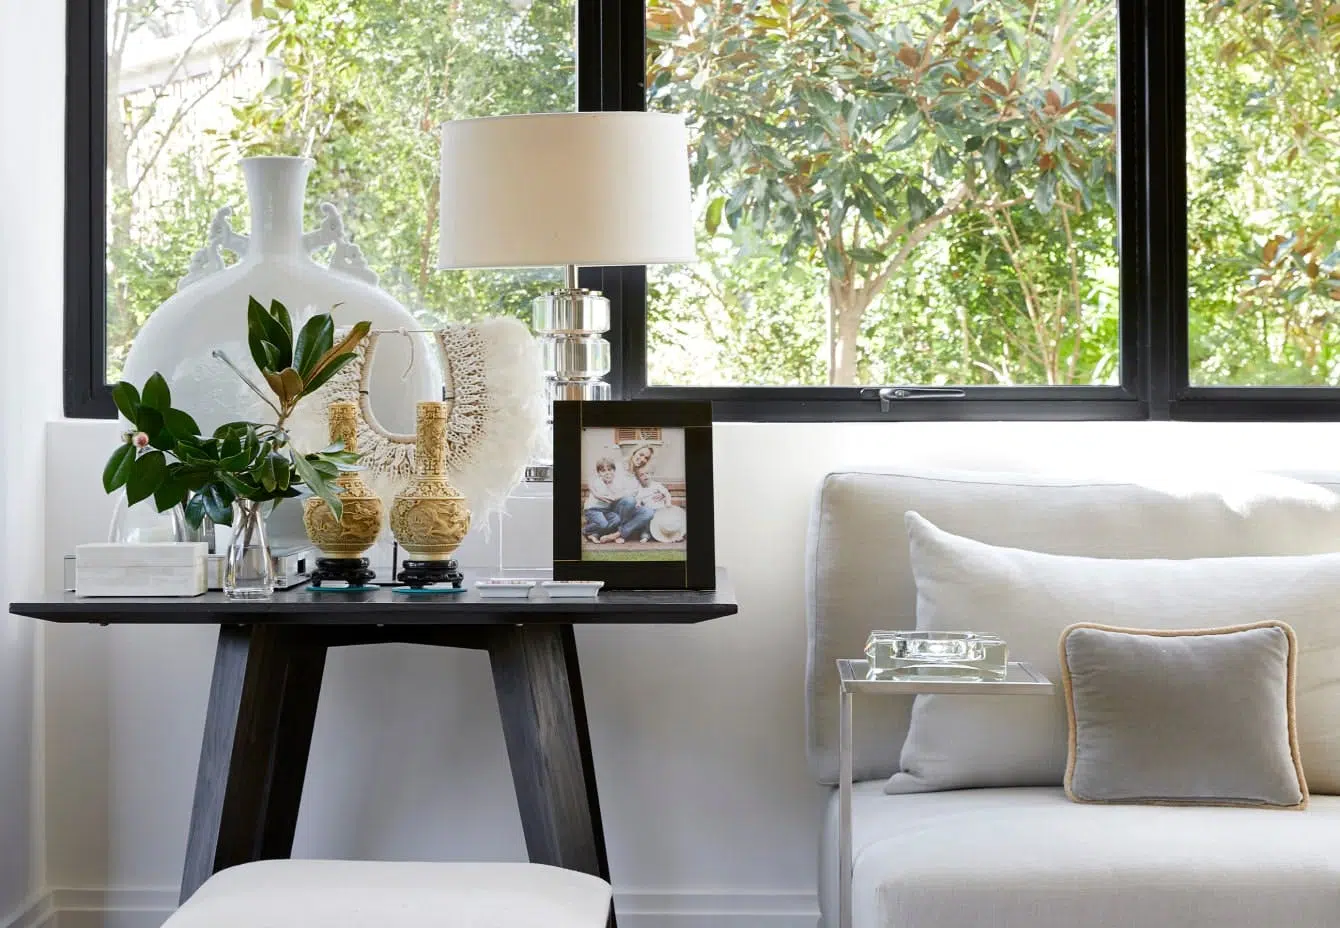 Close-up of a living room with two side tables with decorative accents on top, a window with a view of a tree outside, and the corner of a white sofa.